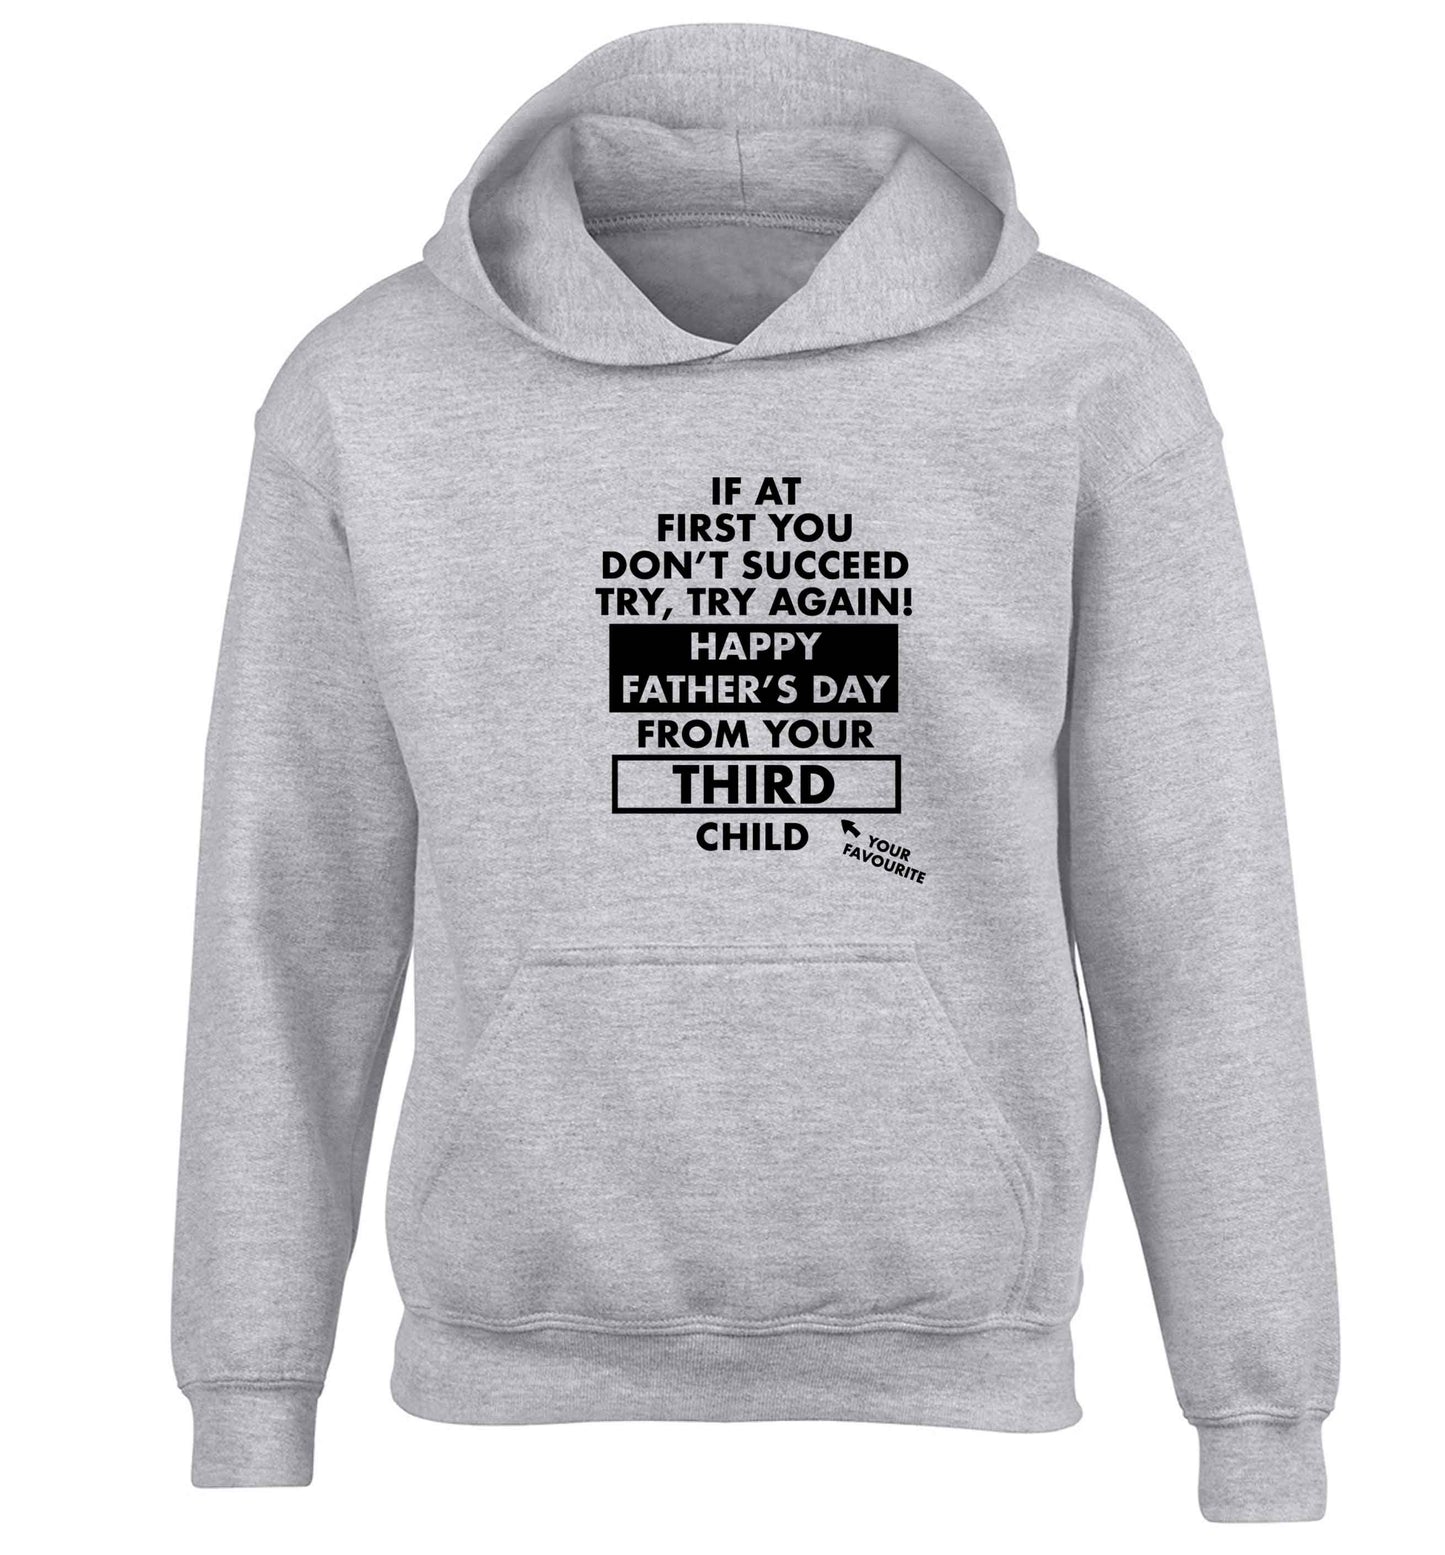 If at first you don't succeed try, try again Happy Father's day from your third child! children's grey hoodie 12-13 Years